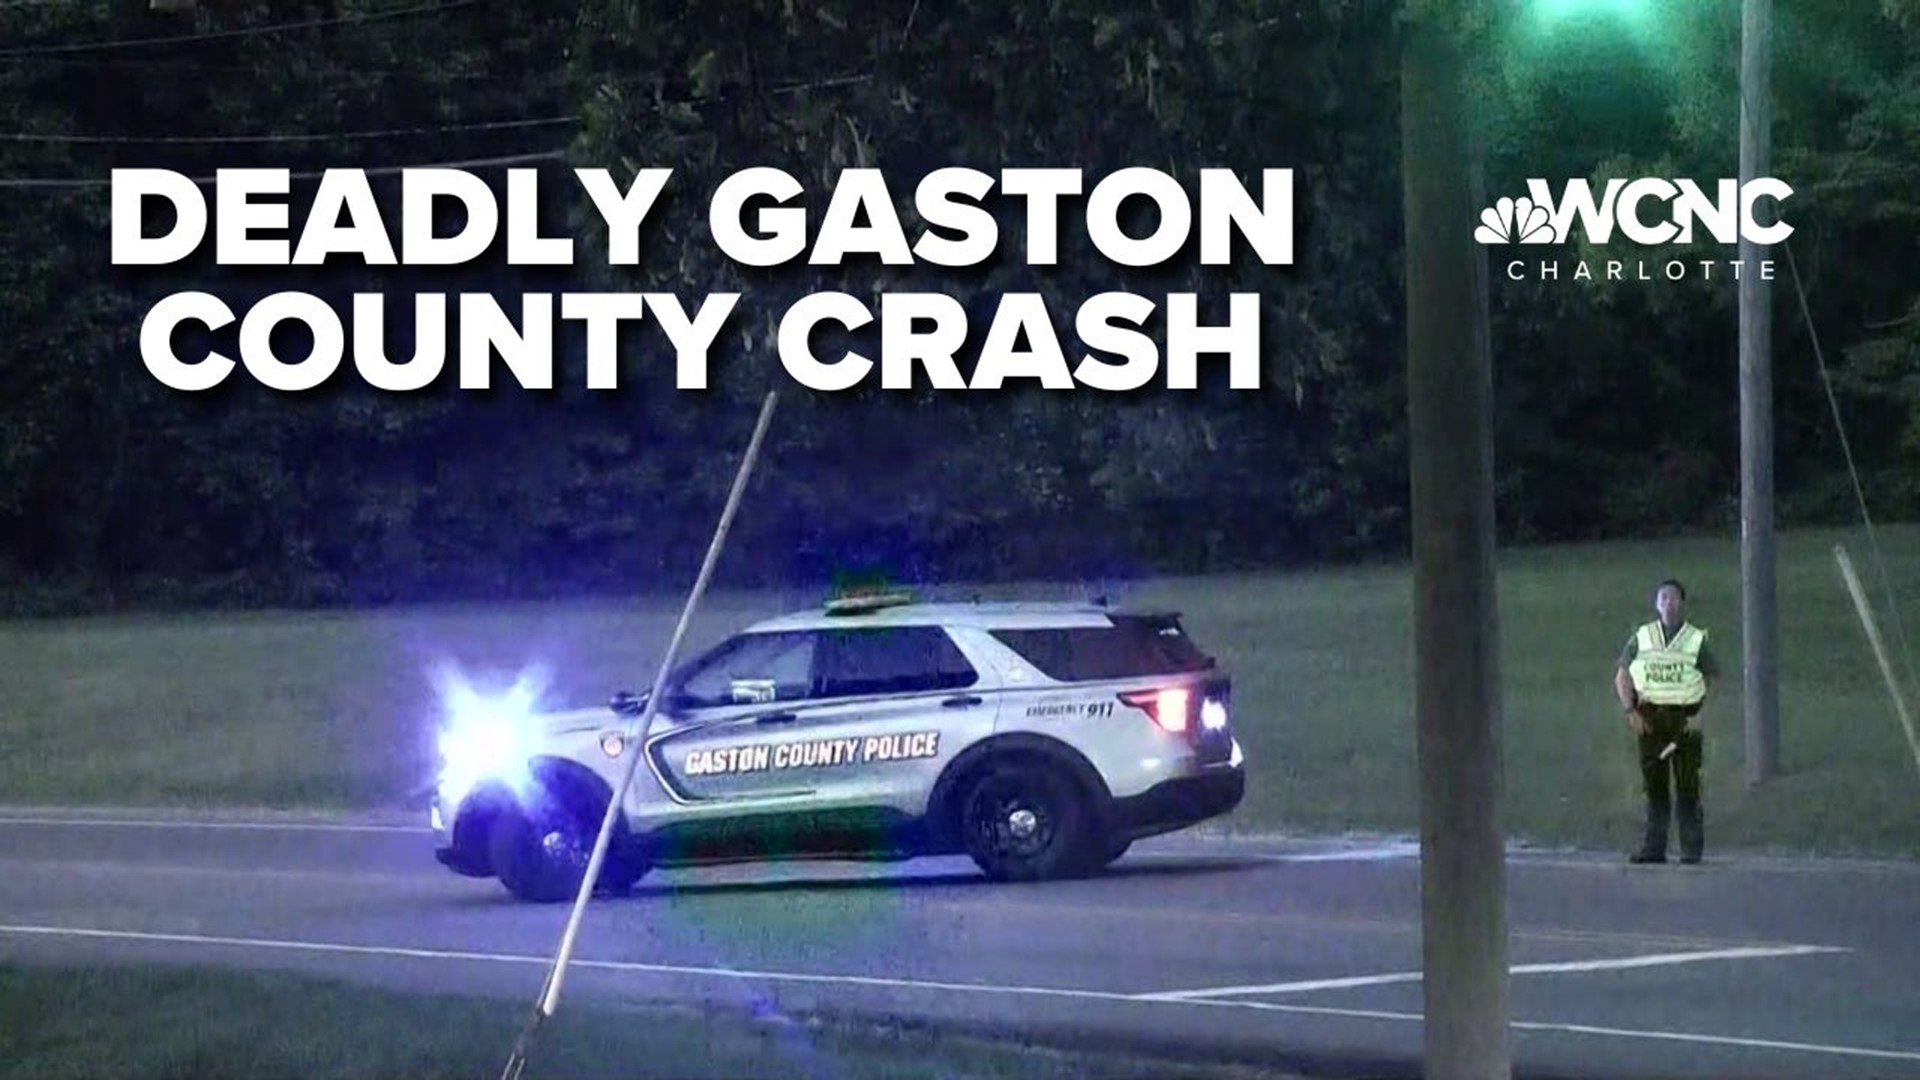 One person was killed in a car crash in Gastonia. Officials say the crash sparked a fire.